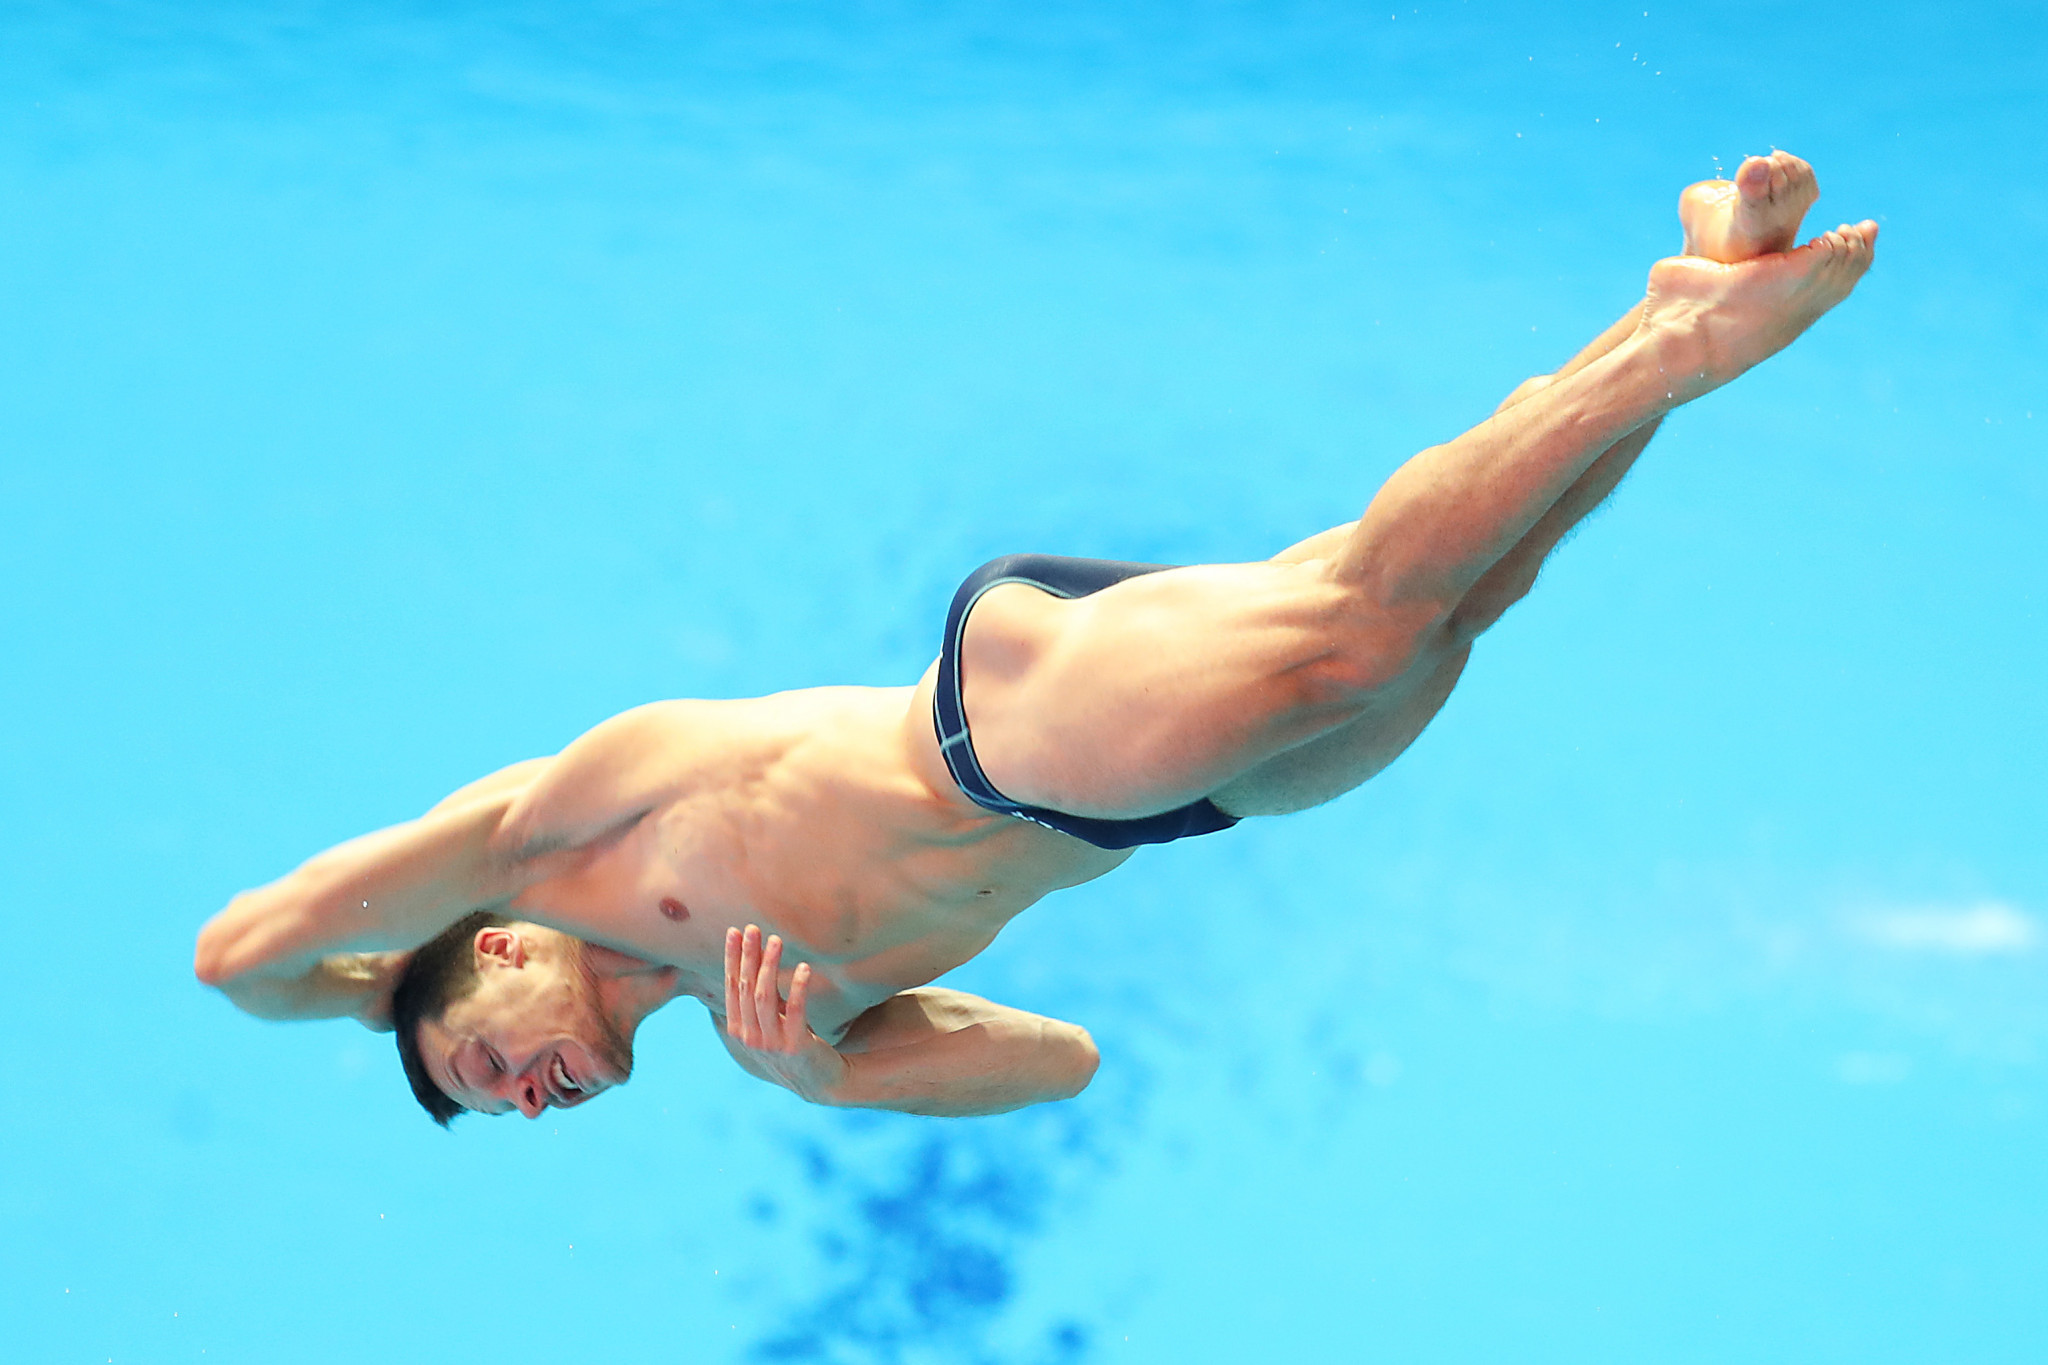 Germany's Patrick Hausding has his second gold in three days at Liko Sports Centre after adding 1m springboard victory to his win in the mixed team event ©Getty Images